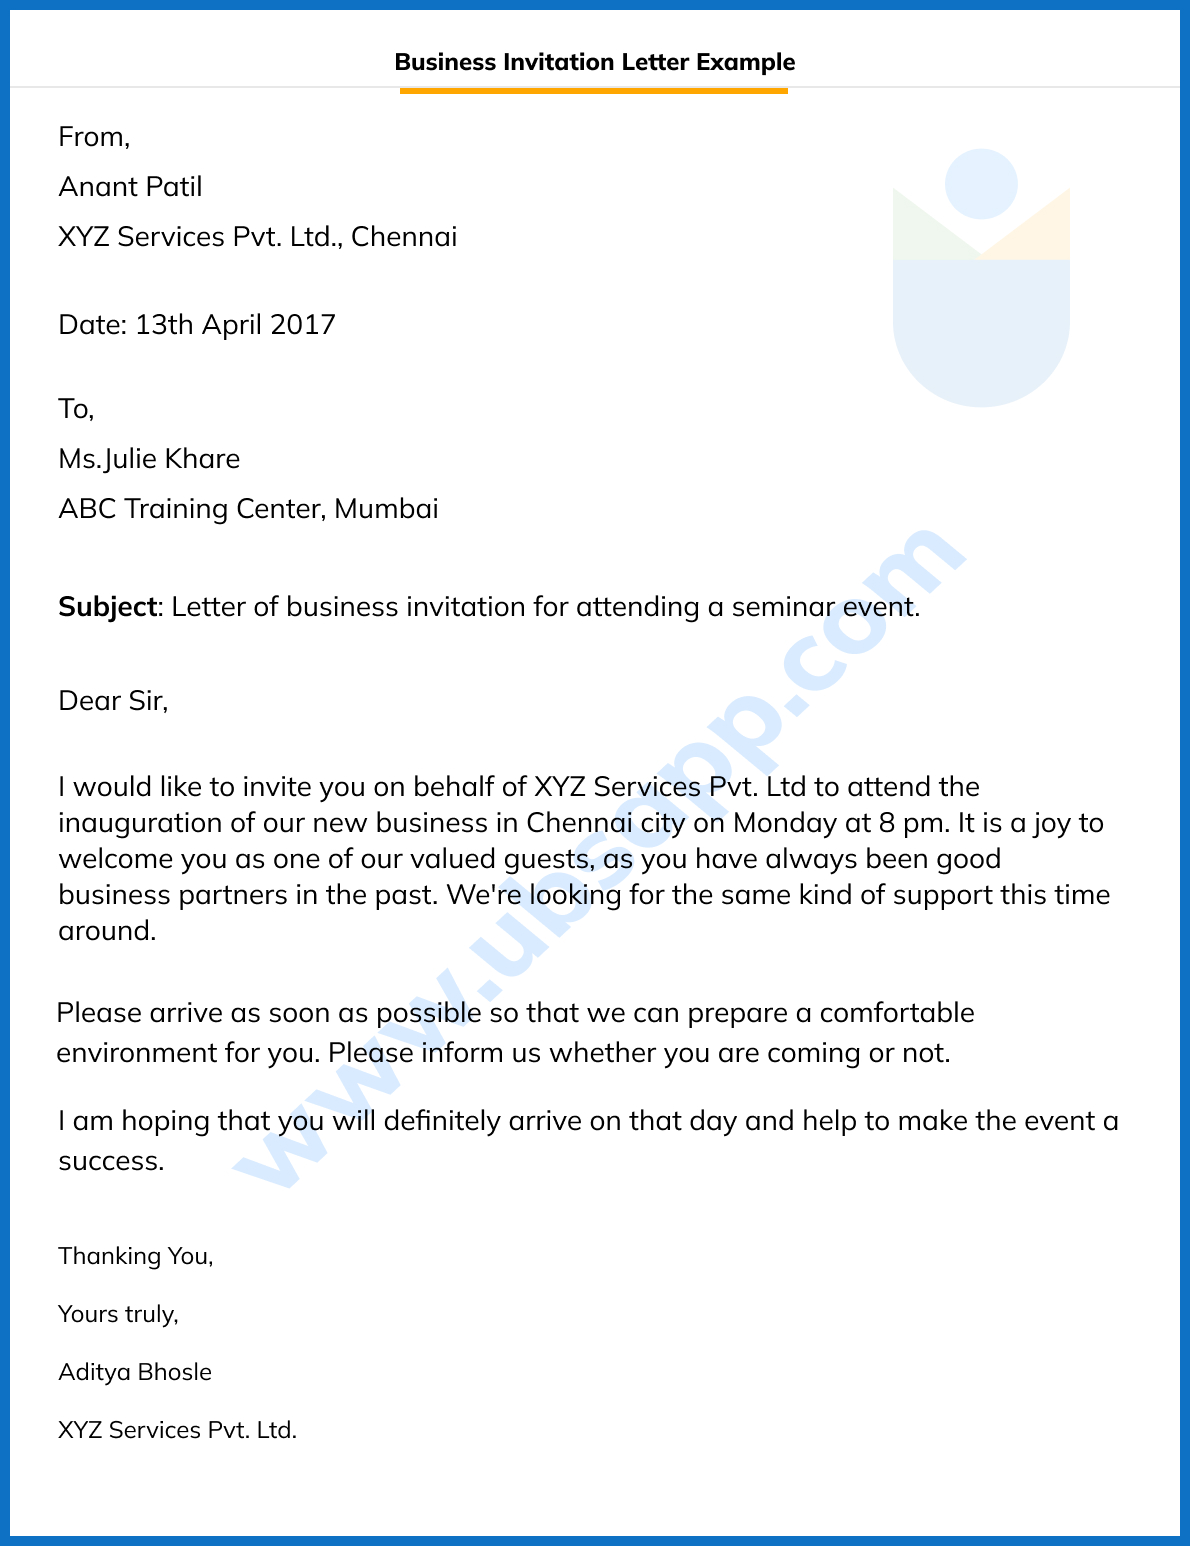 Business Invitation Letter Example